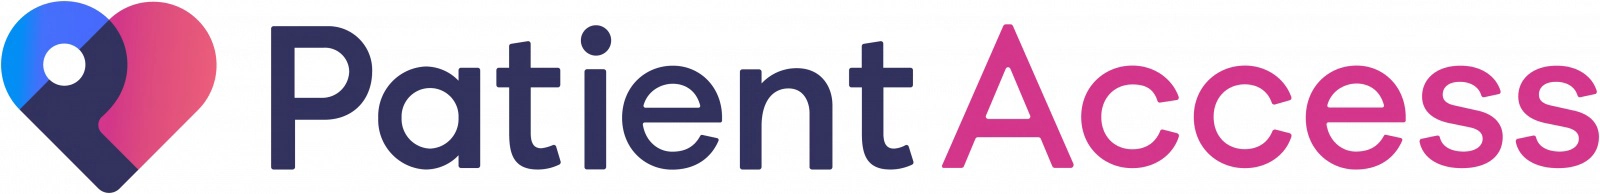 Image of Patient Access Logo